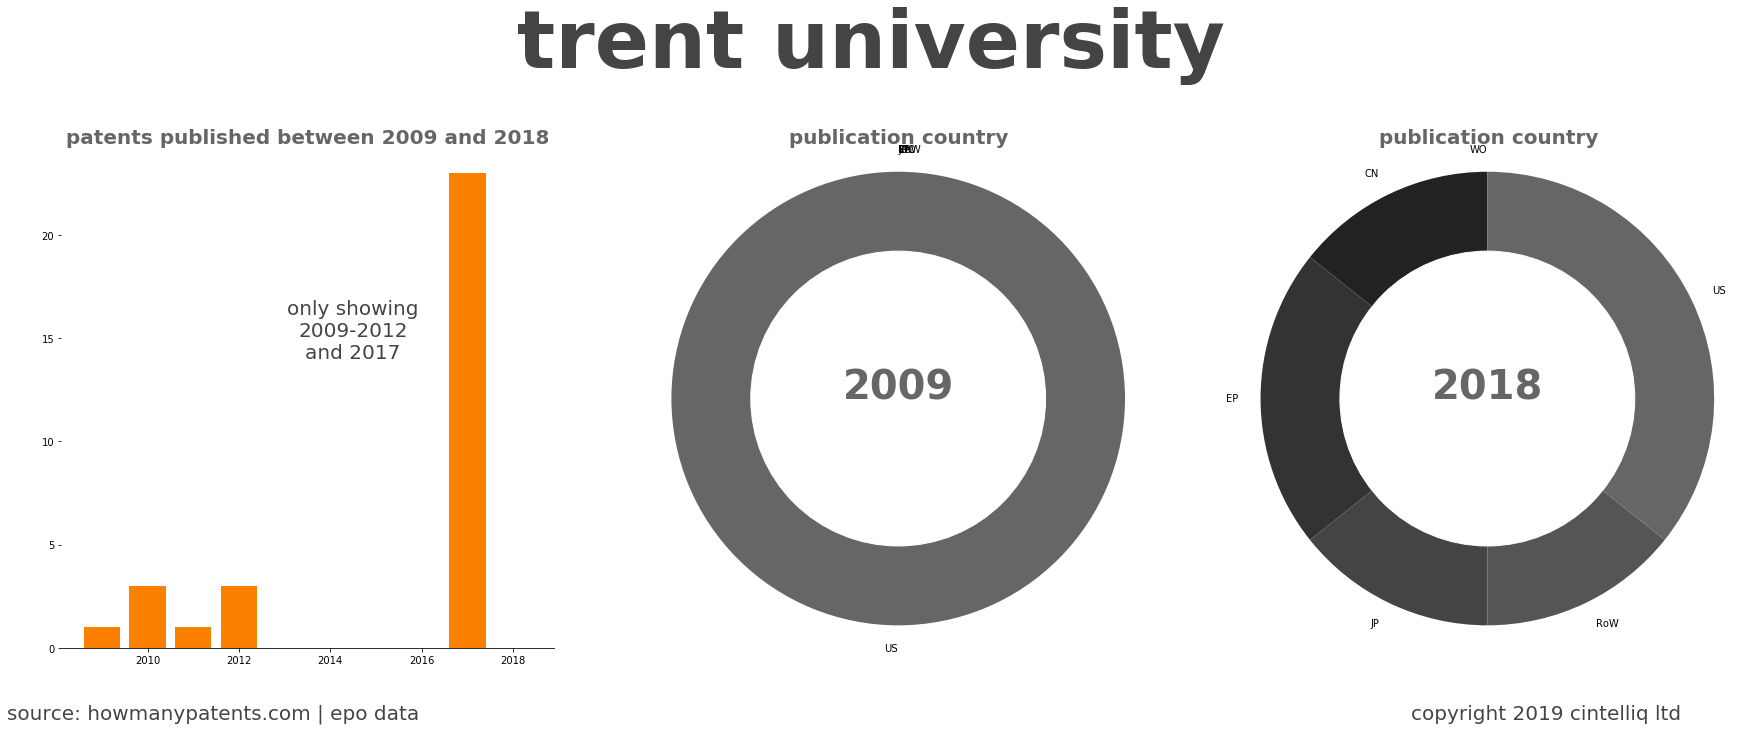 summary of patents for Trent University